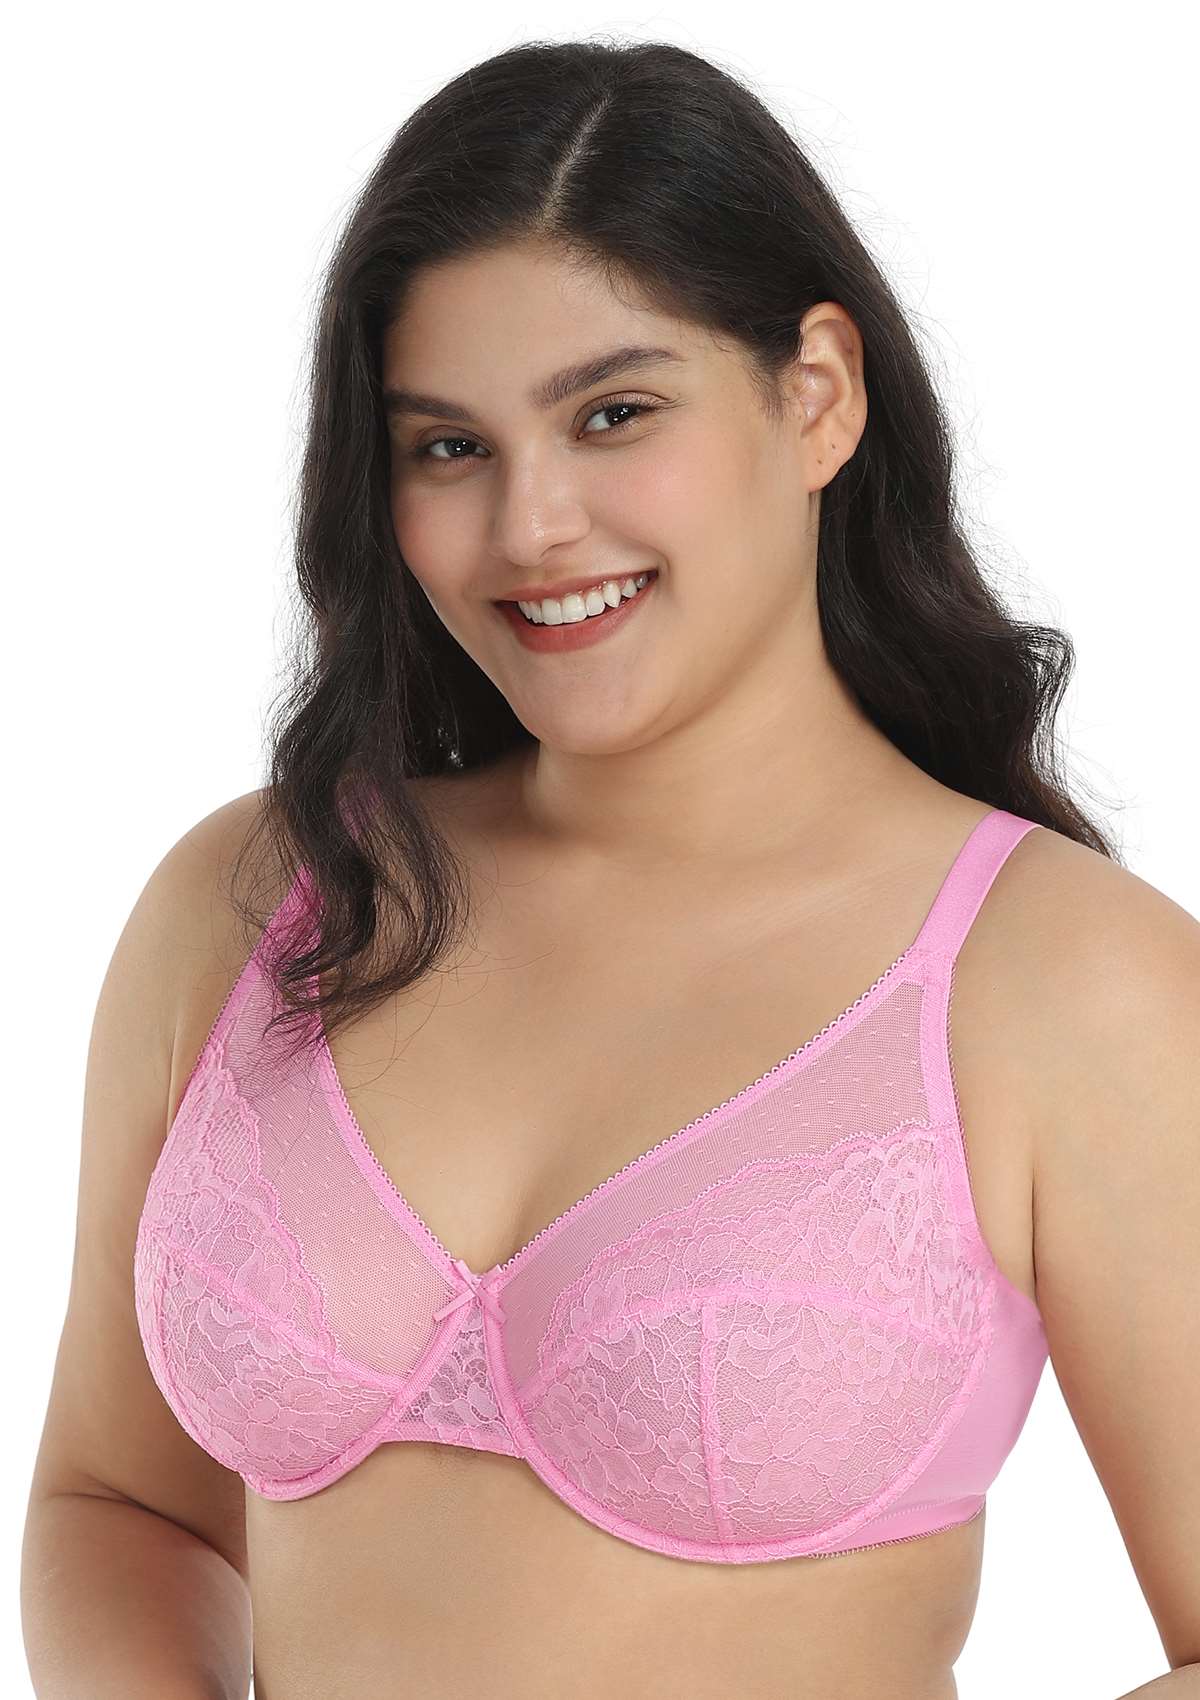 HSIA Enchante Lacy Bra: Comfy Sheer Lace Bra With Lift - Pink / 42 / C